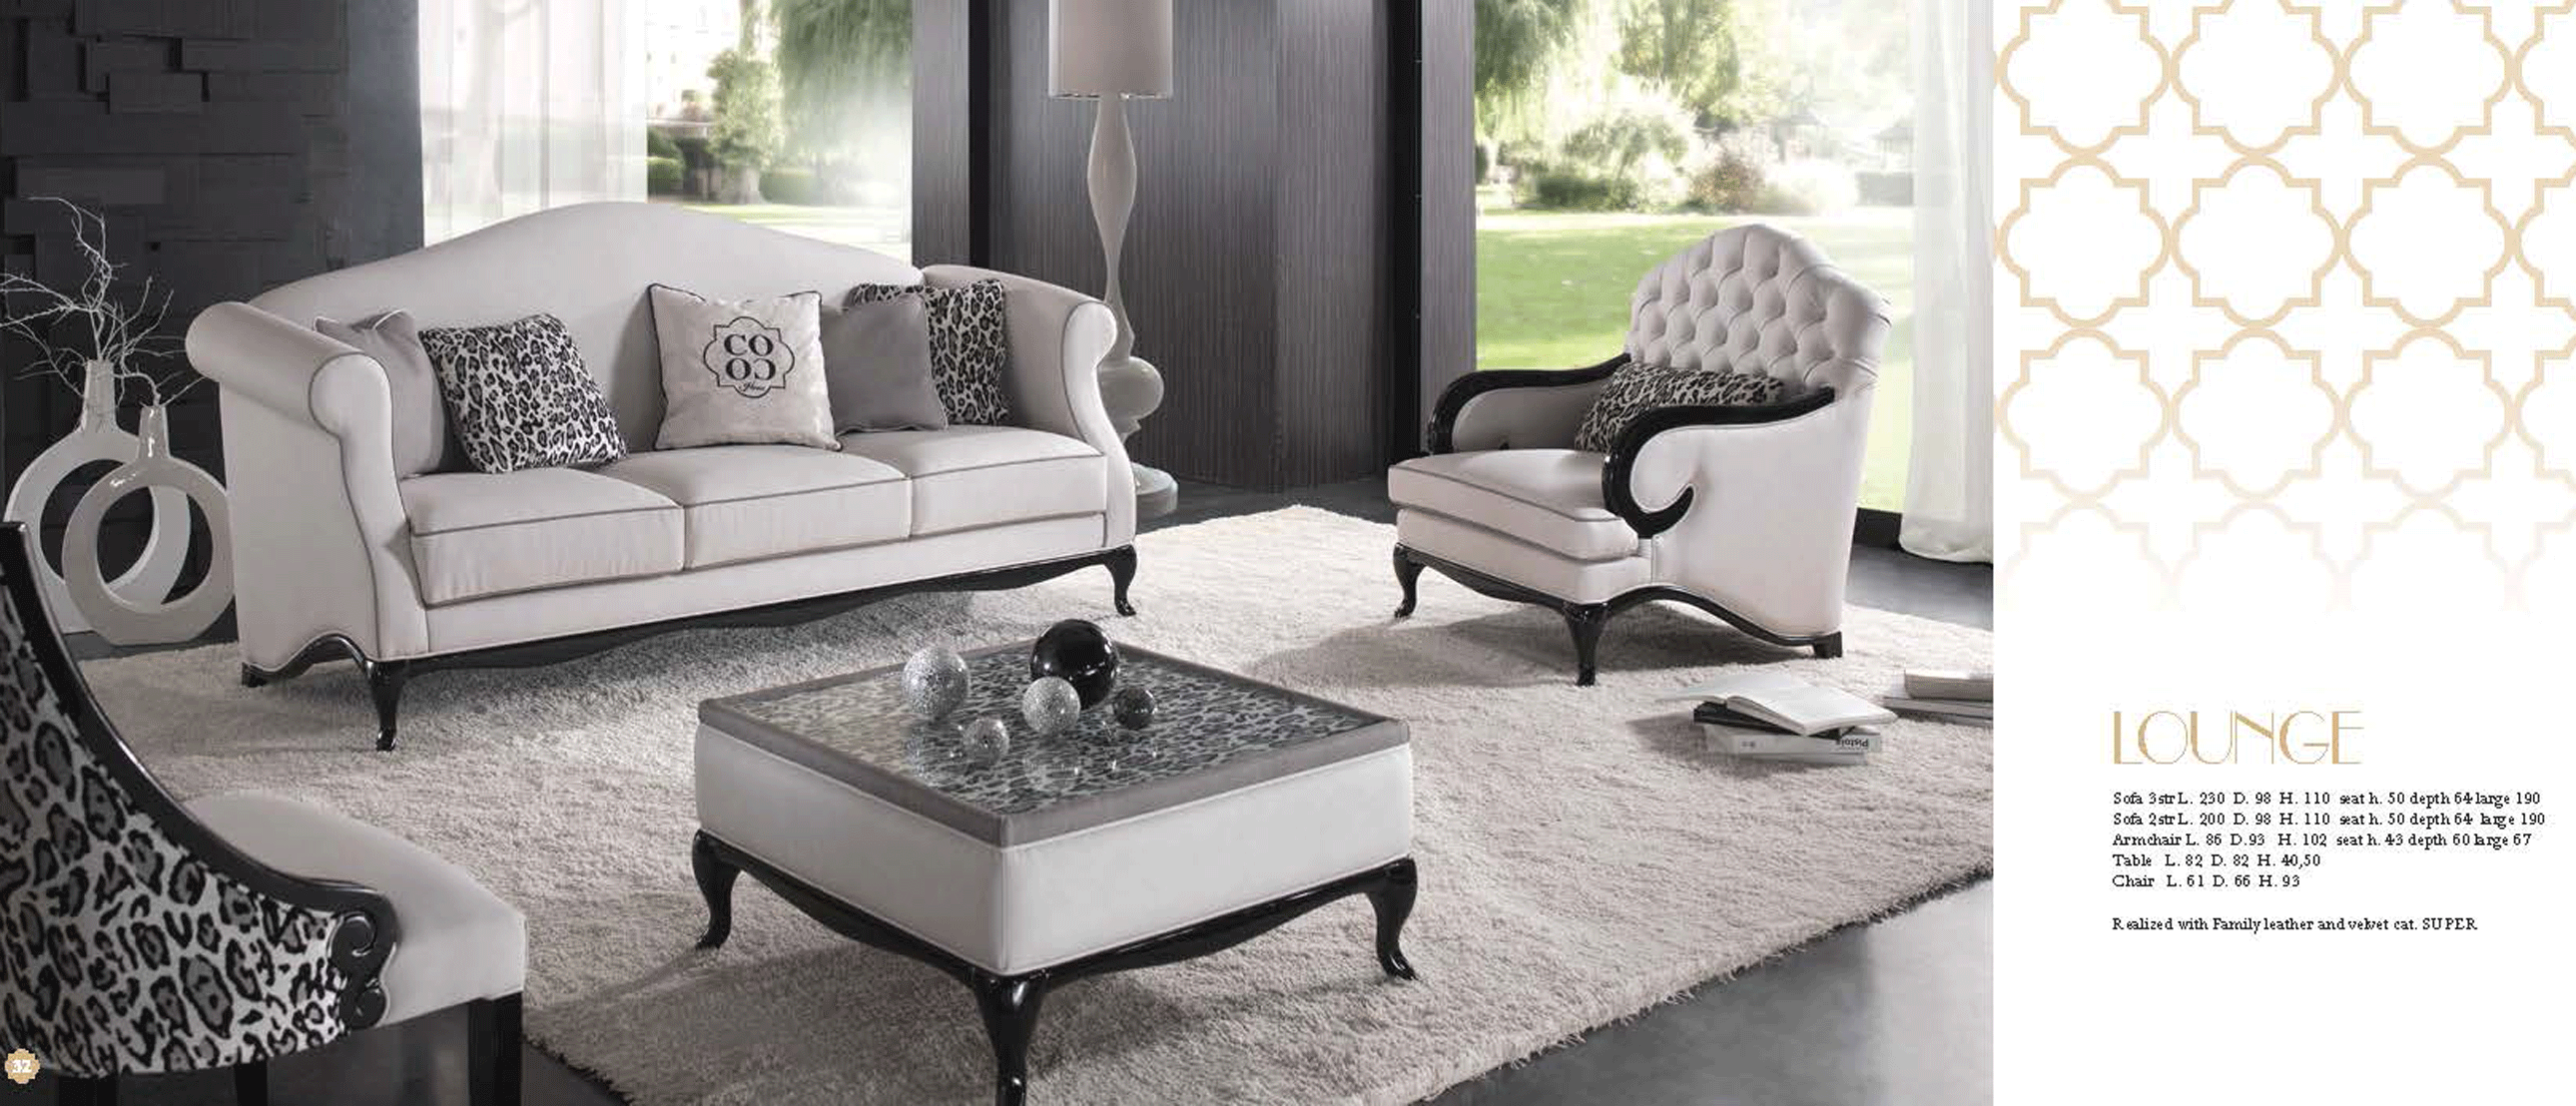 Living Room Furniture Sofas Loveseats and Chairs Lounge